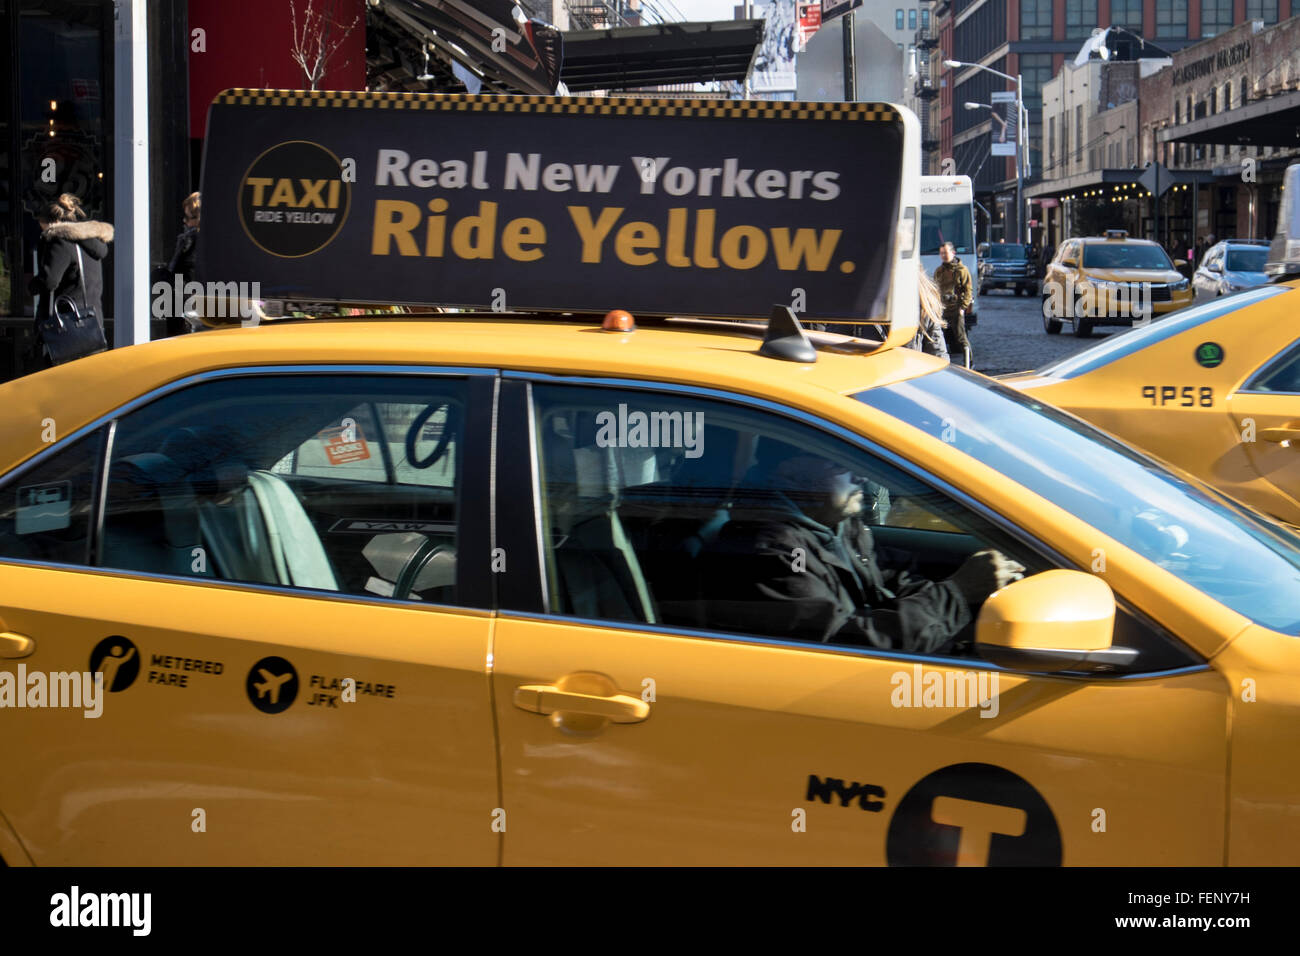 Yellow cabs, hybrid, New York taxi, Times Square, NYC Stock Photo